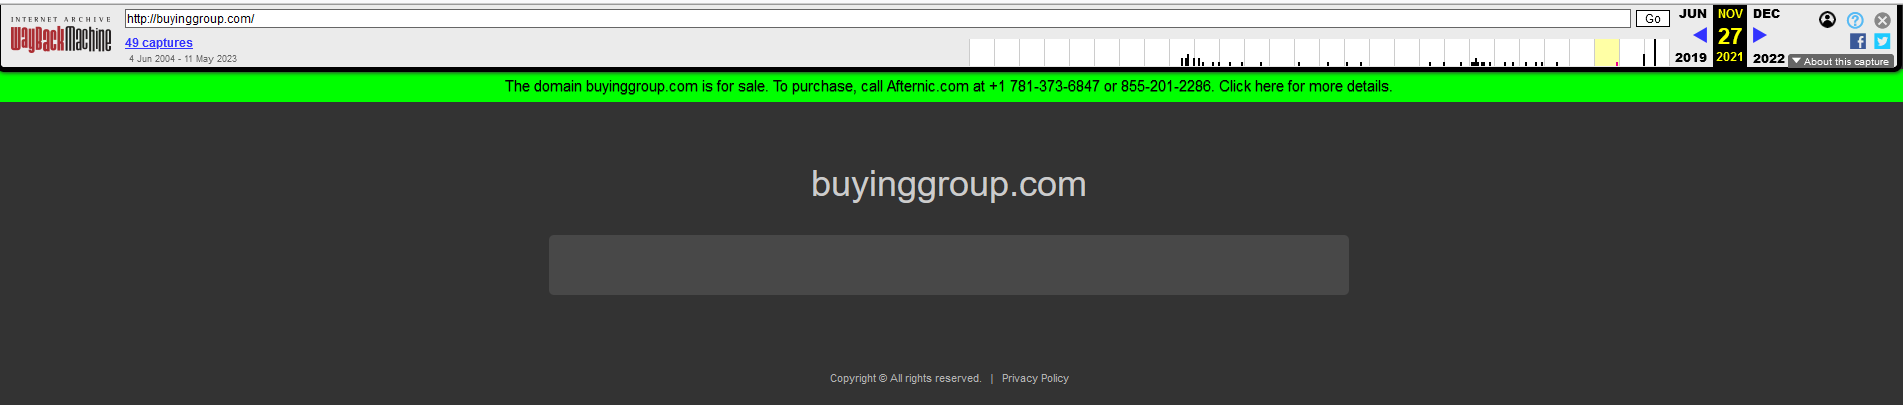 BuyingGroup.com was such a powerhouse before the acquisition!